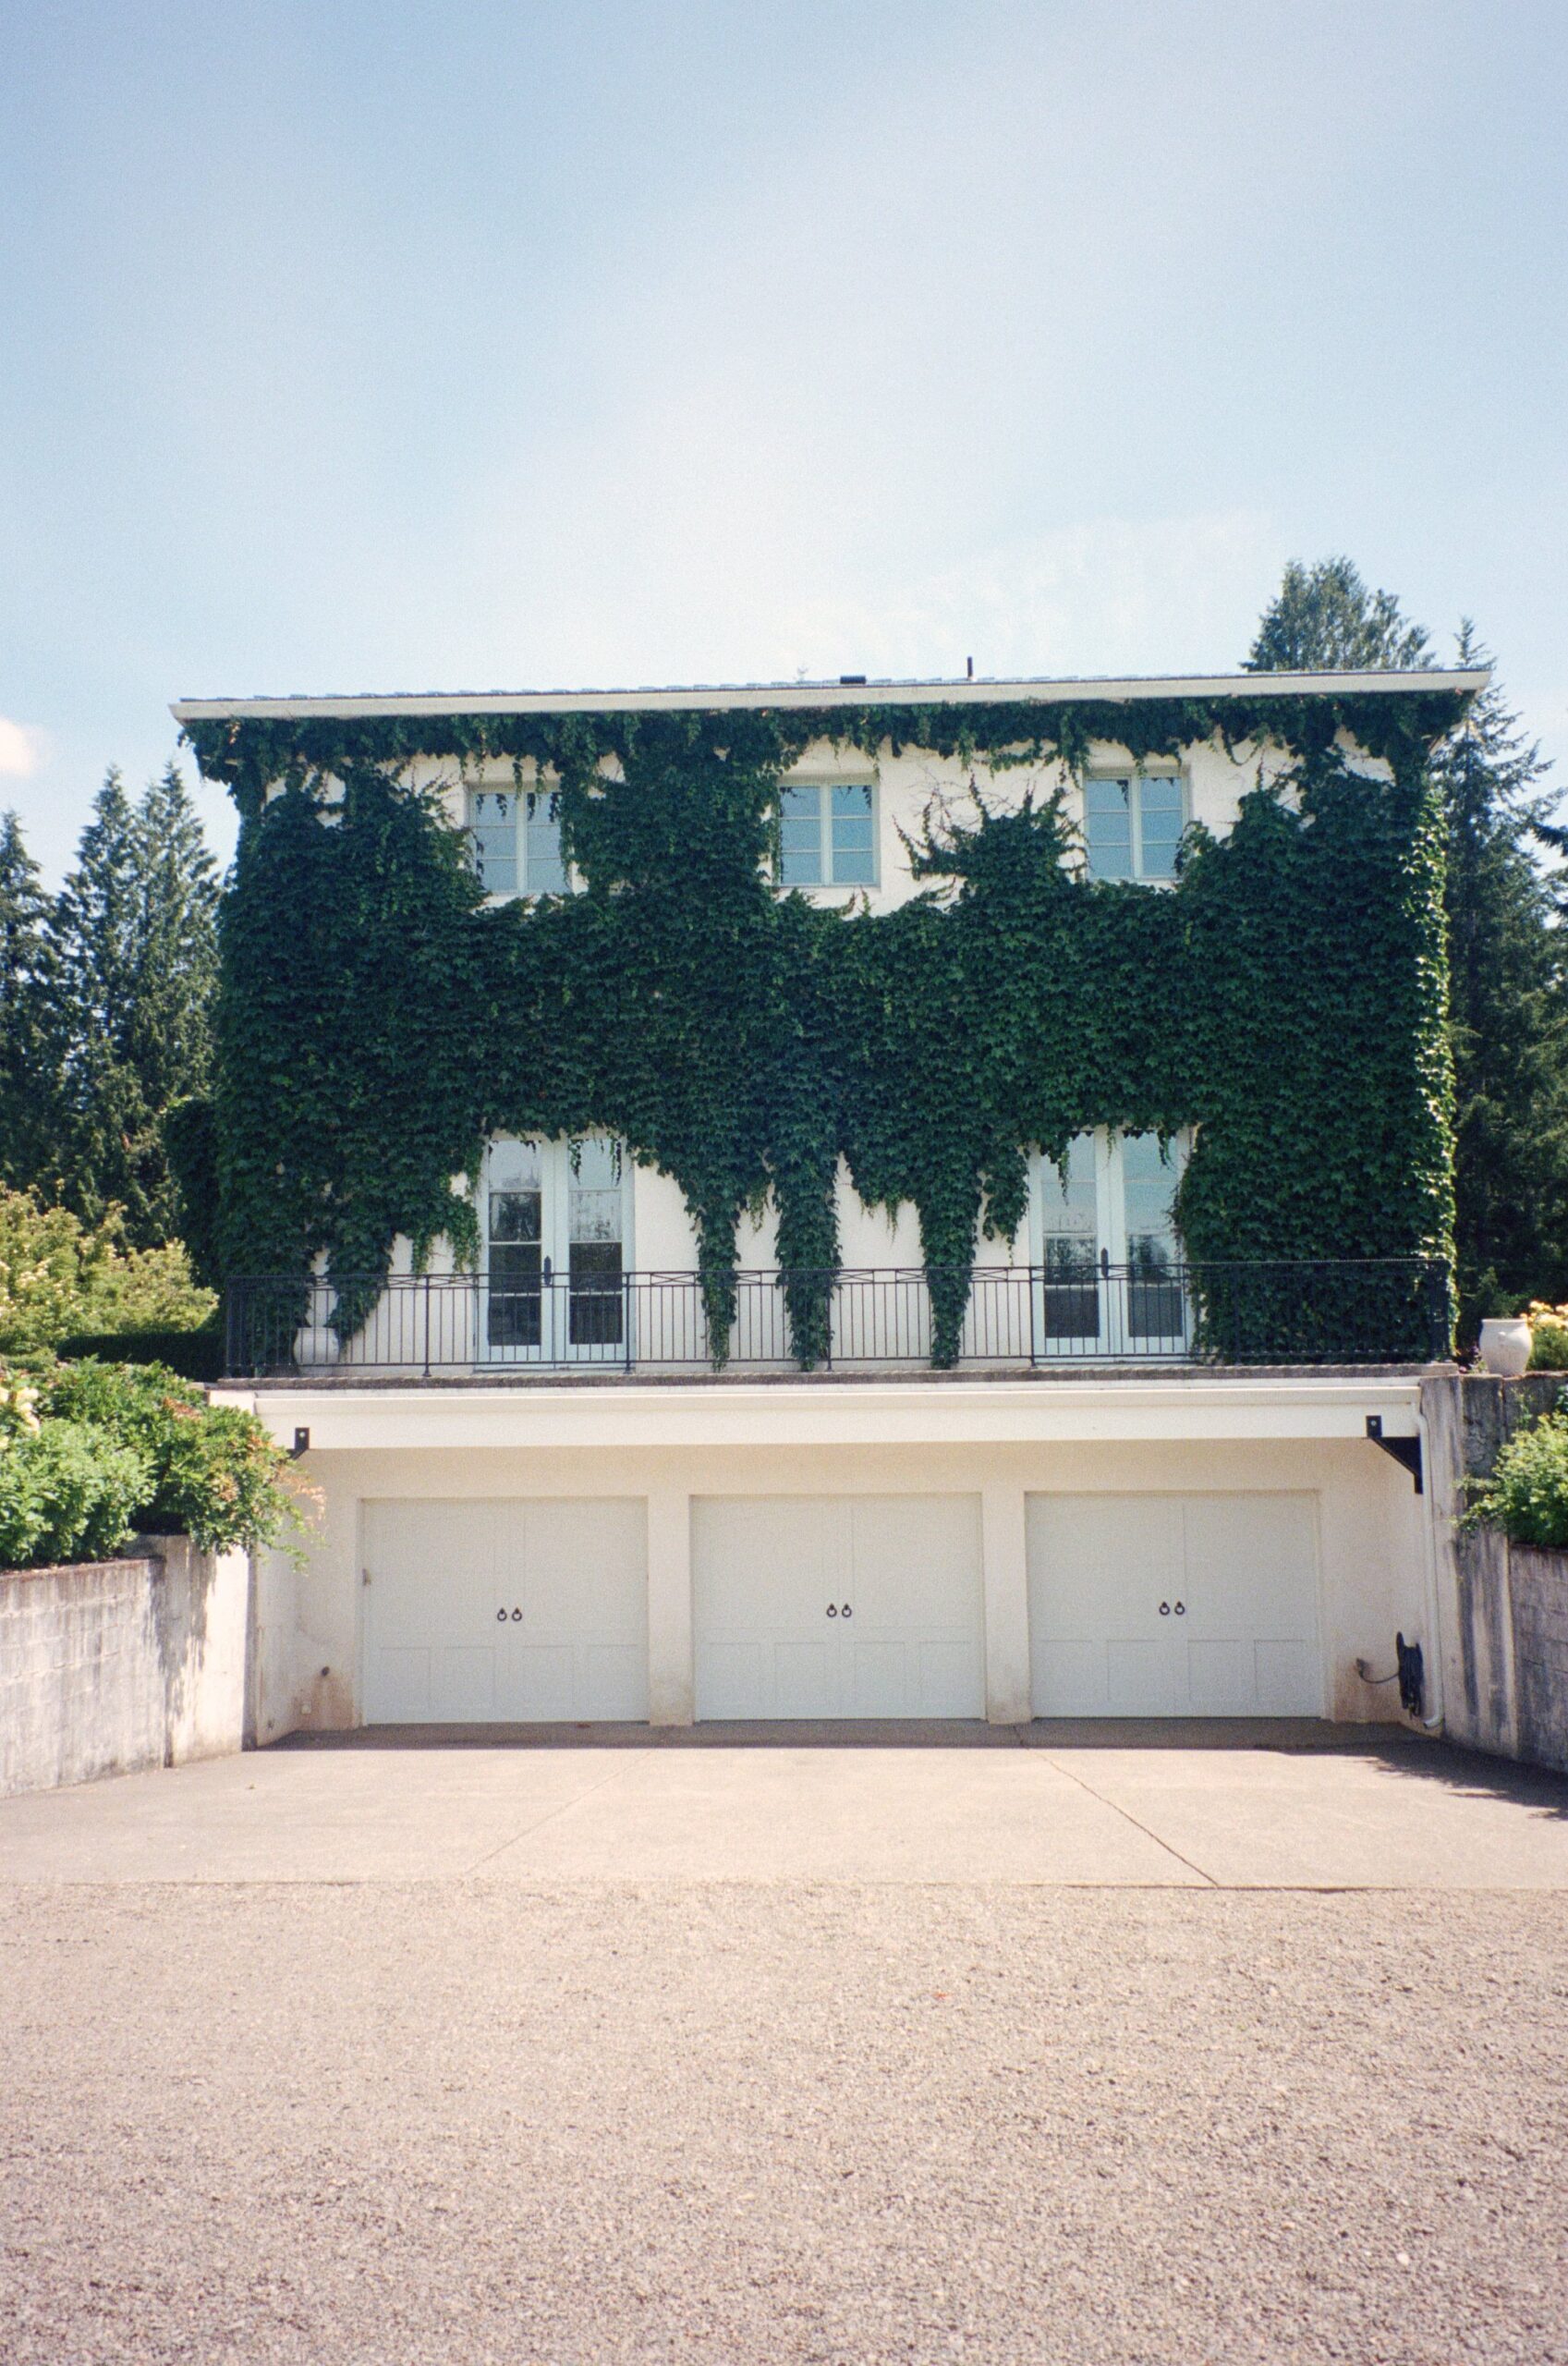 wedding venue building with large vine plants growing along building. Oregon film photography for weddings and engagements